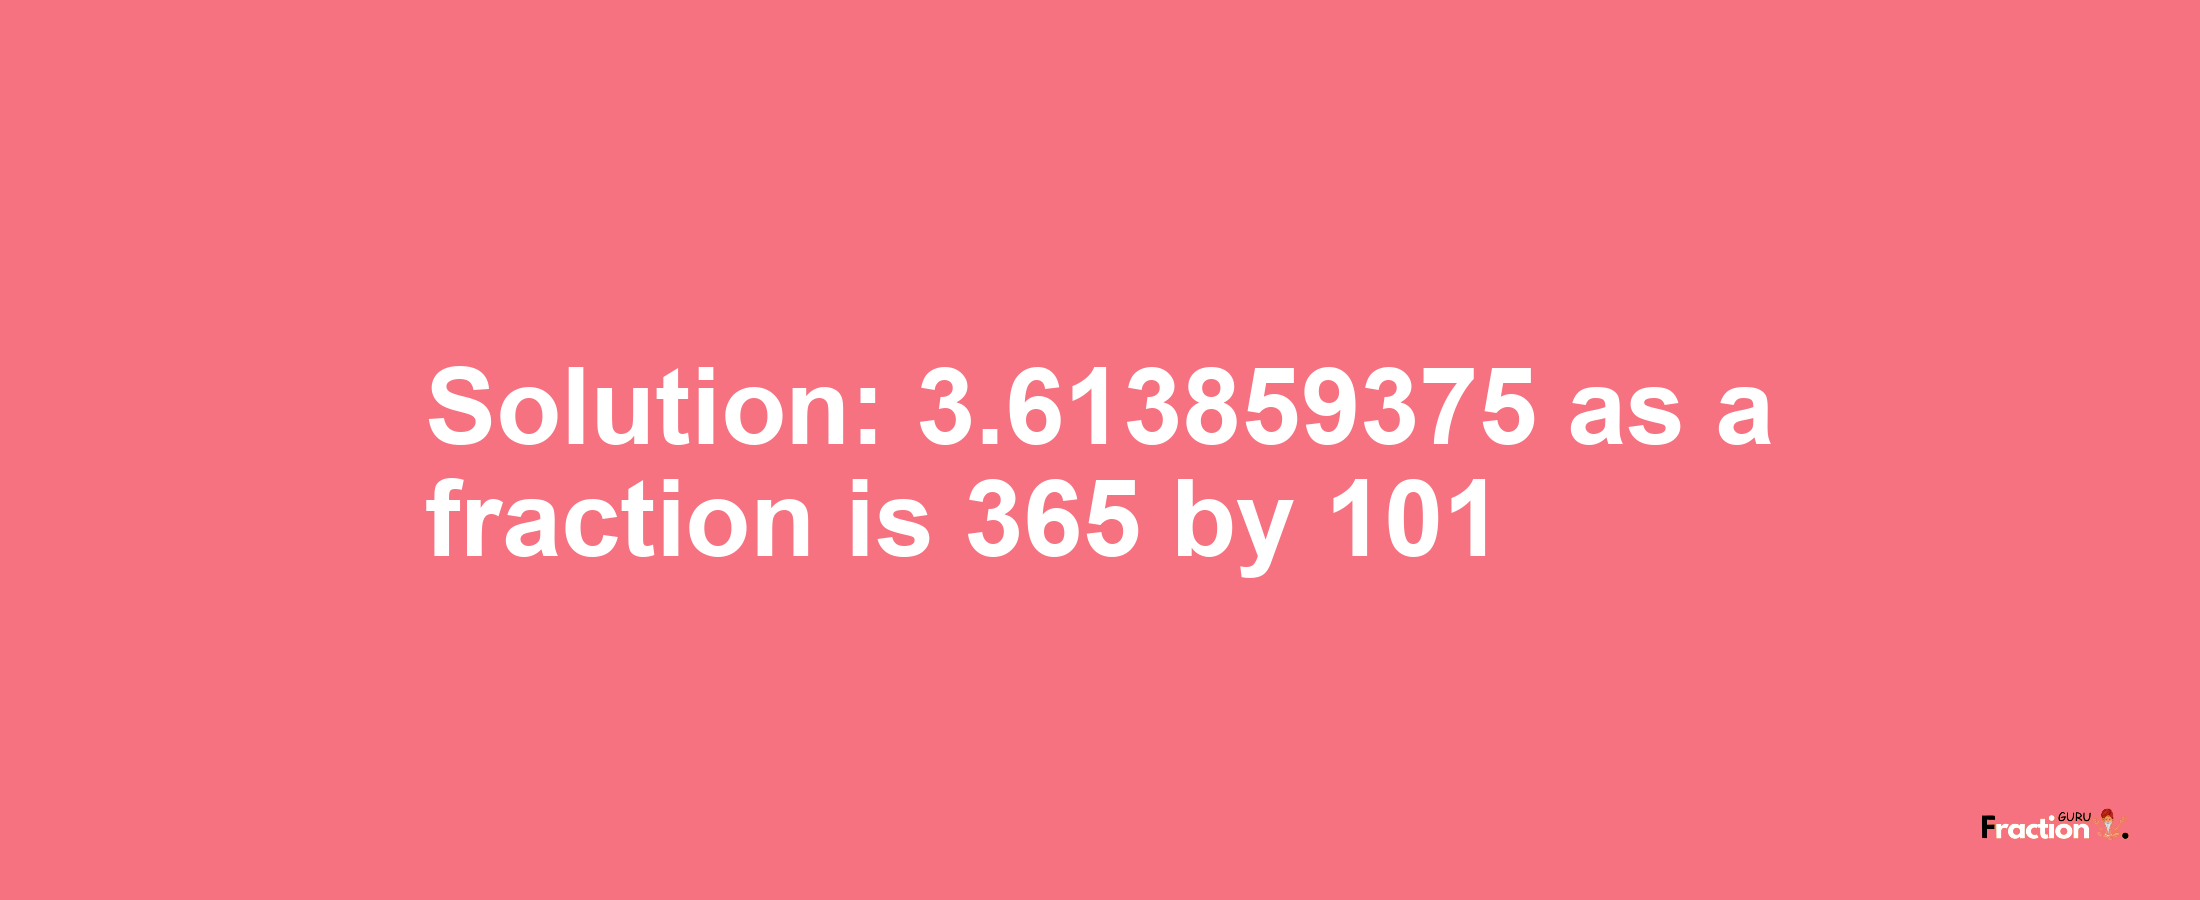 Solution:3.613859375 as a fraction is 365/101